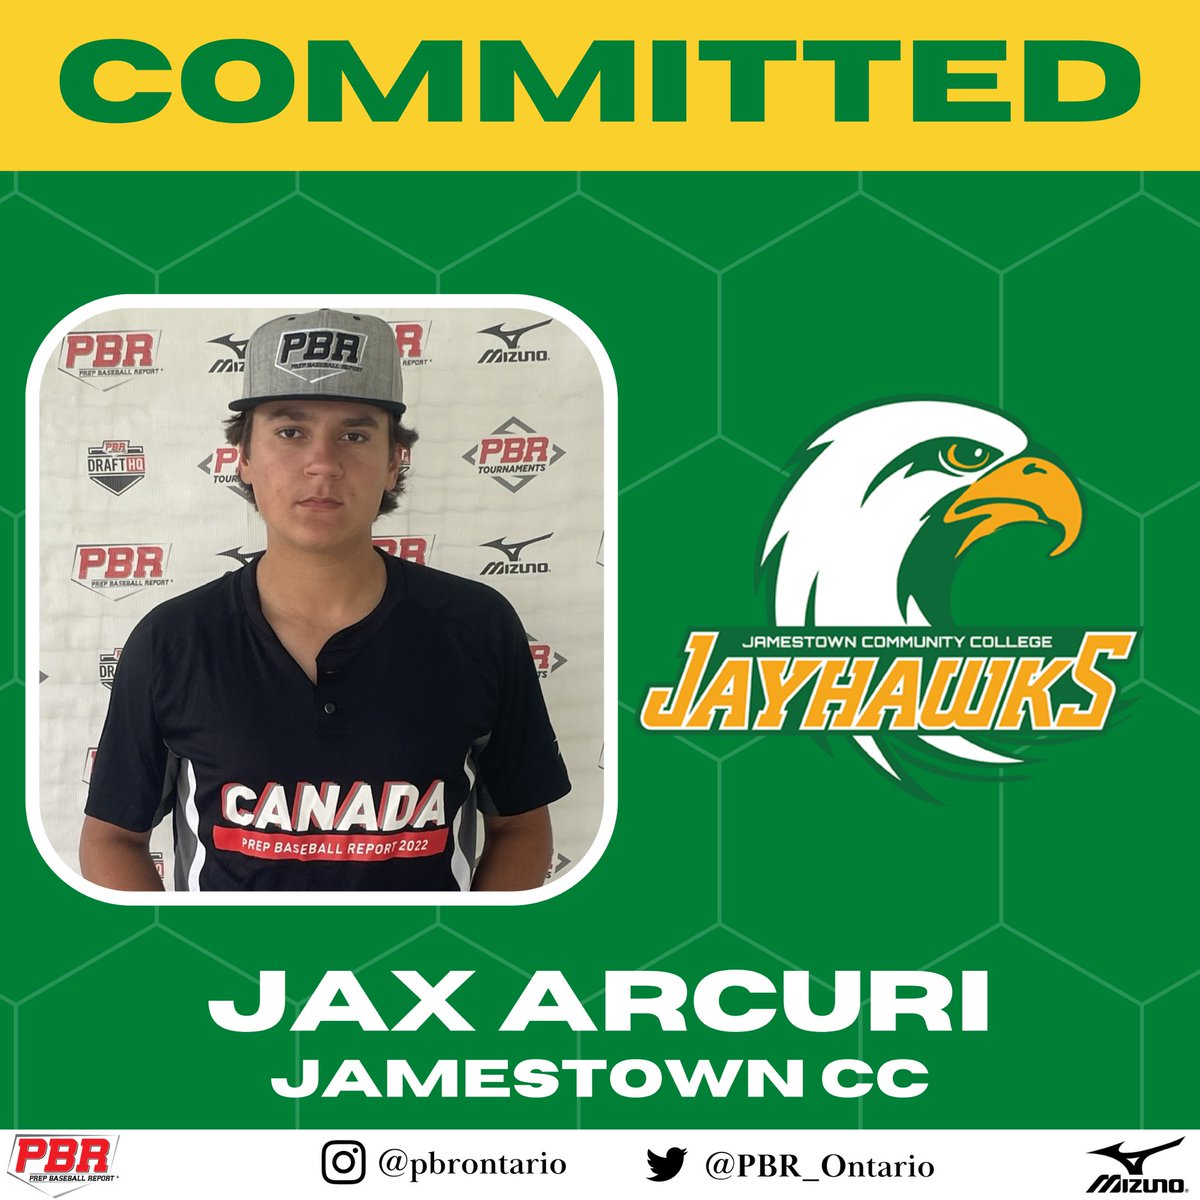 🚨𝐂𝐎𝐌𝐌𝐈𝐓𝐌𝐄𝐍𝐓 𝐀𝐋𝐄𝐑𝐓🚨 ‘23 C Jax Arcuri has announced his commitment to Jamestown CC. #OffTheBoard🇨🇦